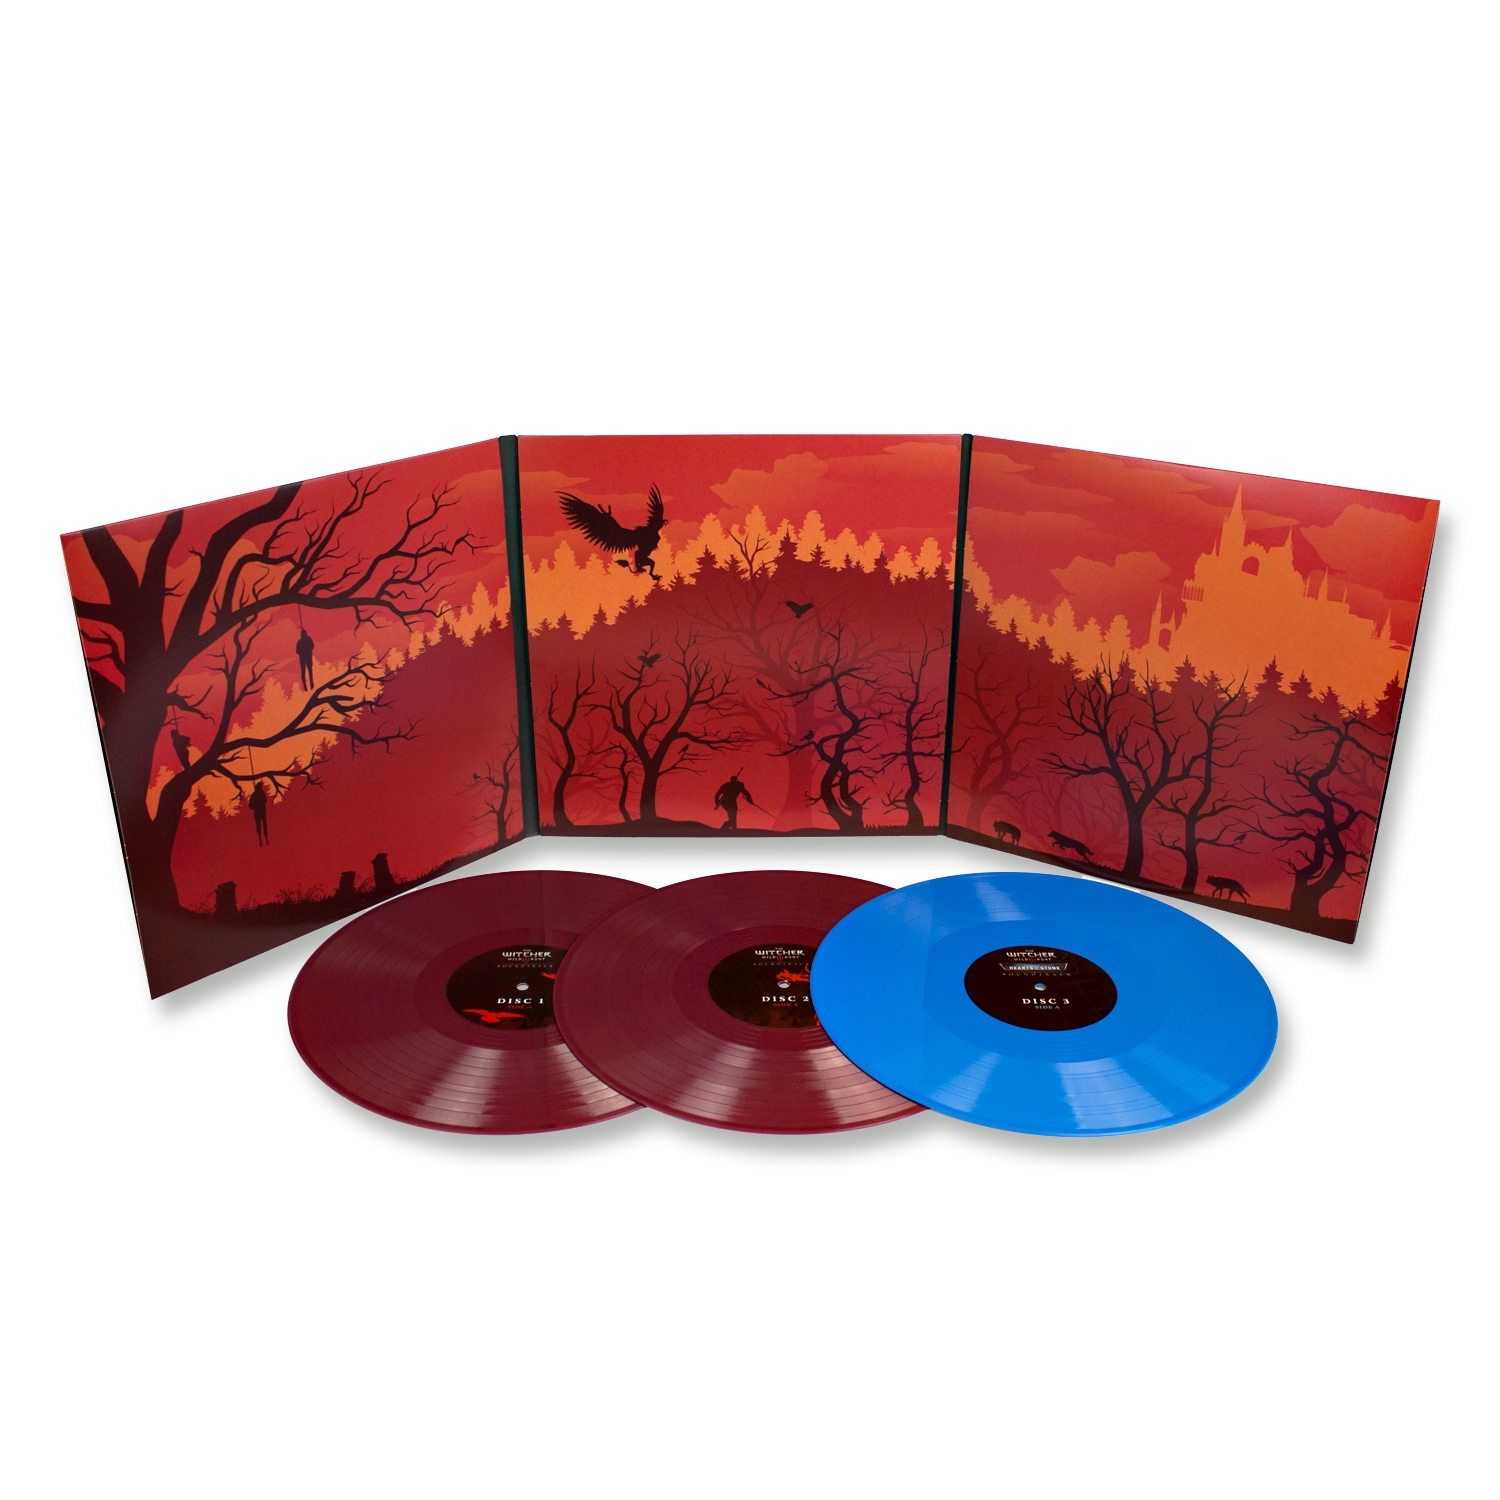 The Witcher 3 - Red & Blue Vinyl